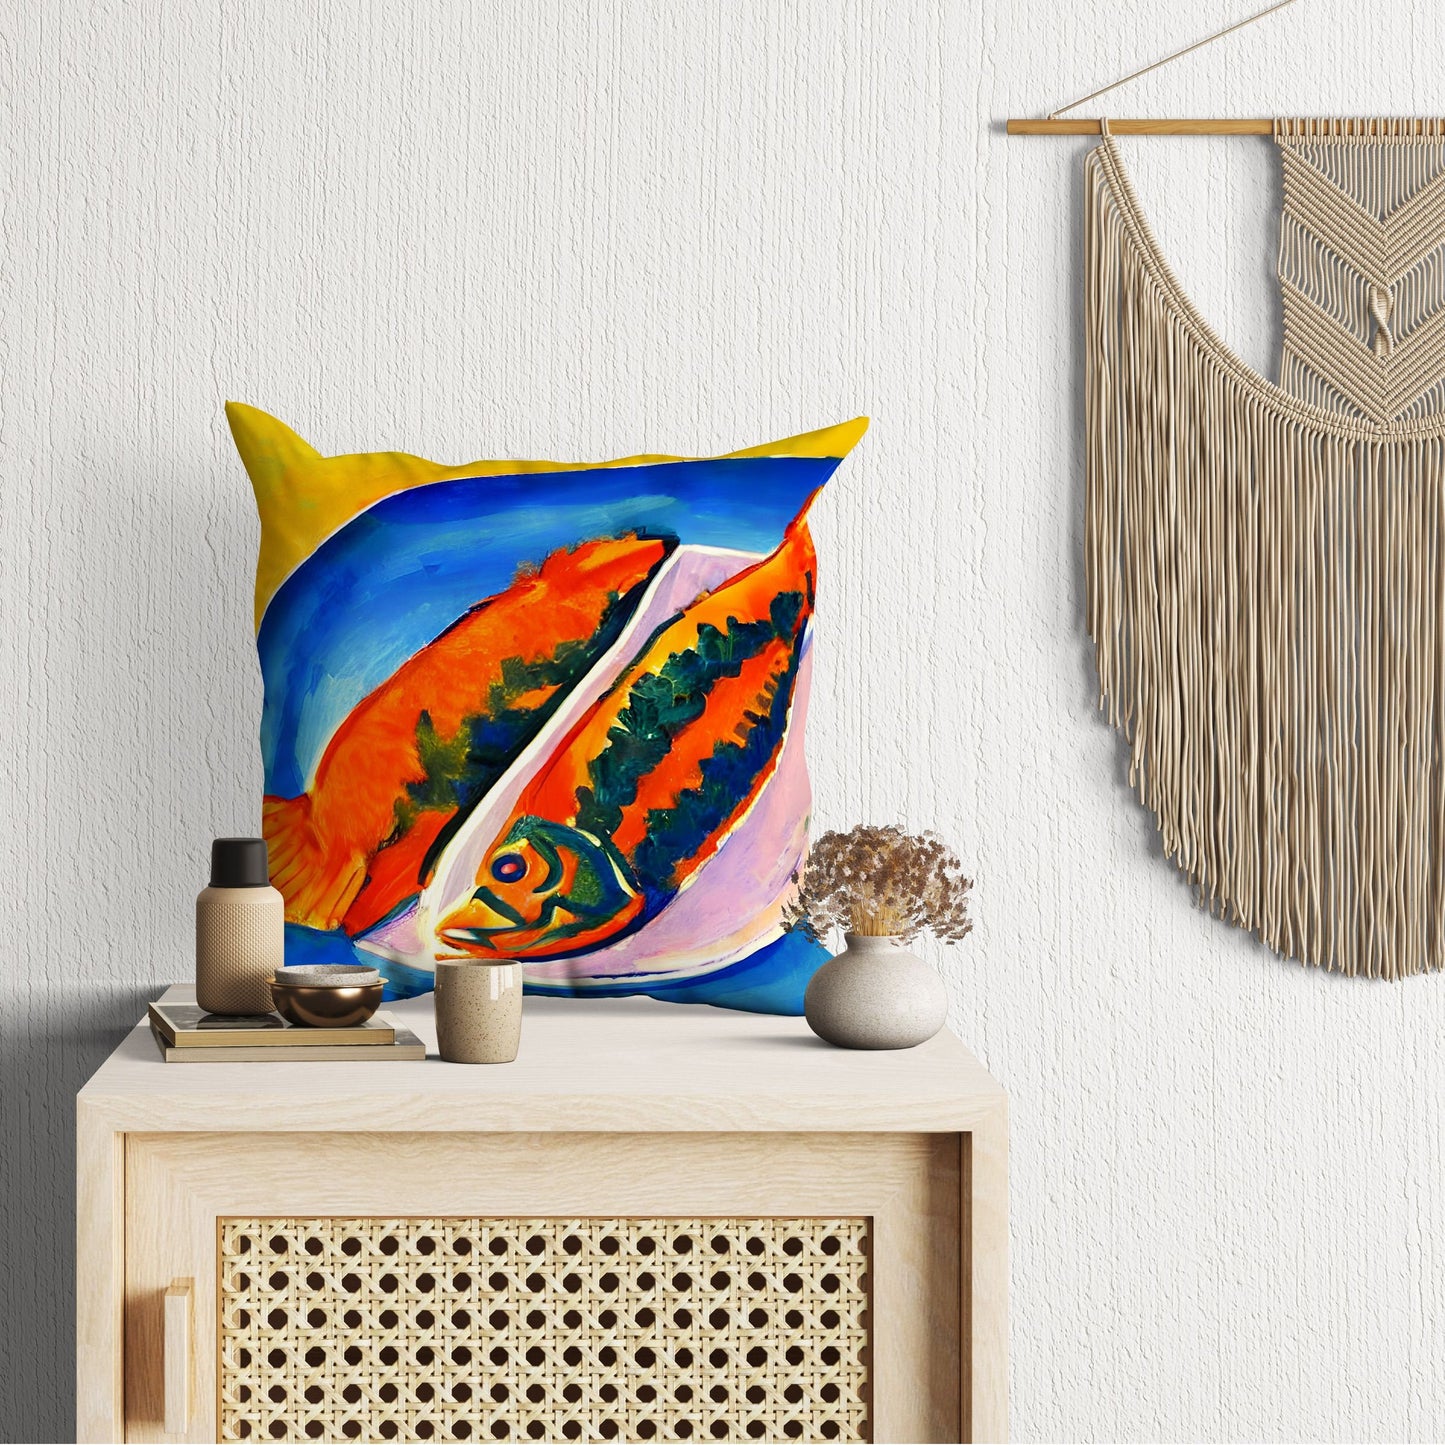 Pan-Fried Fishes Throw Pillow Cover, Abstract Pillow Case, Designer Pillow, Colorful Pillow Case, Housewarming Gift, Nursery Pillow